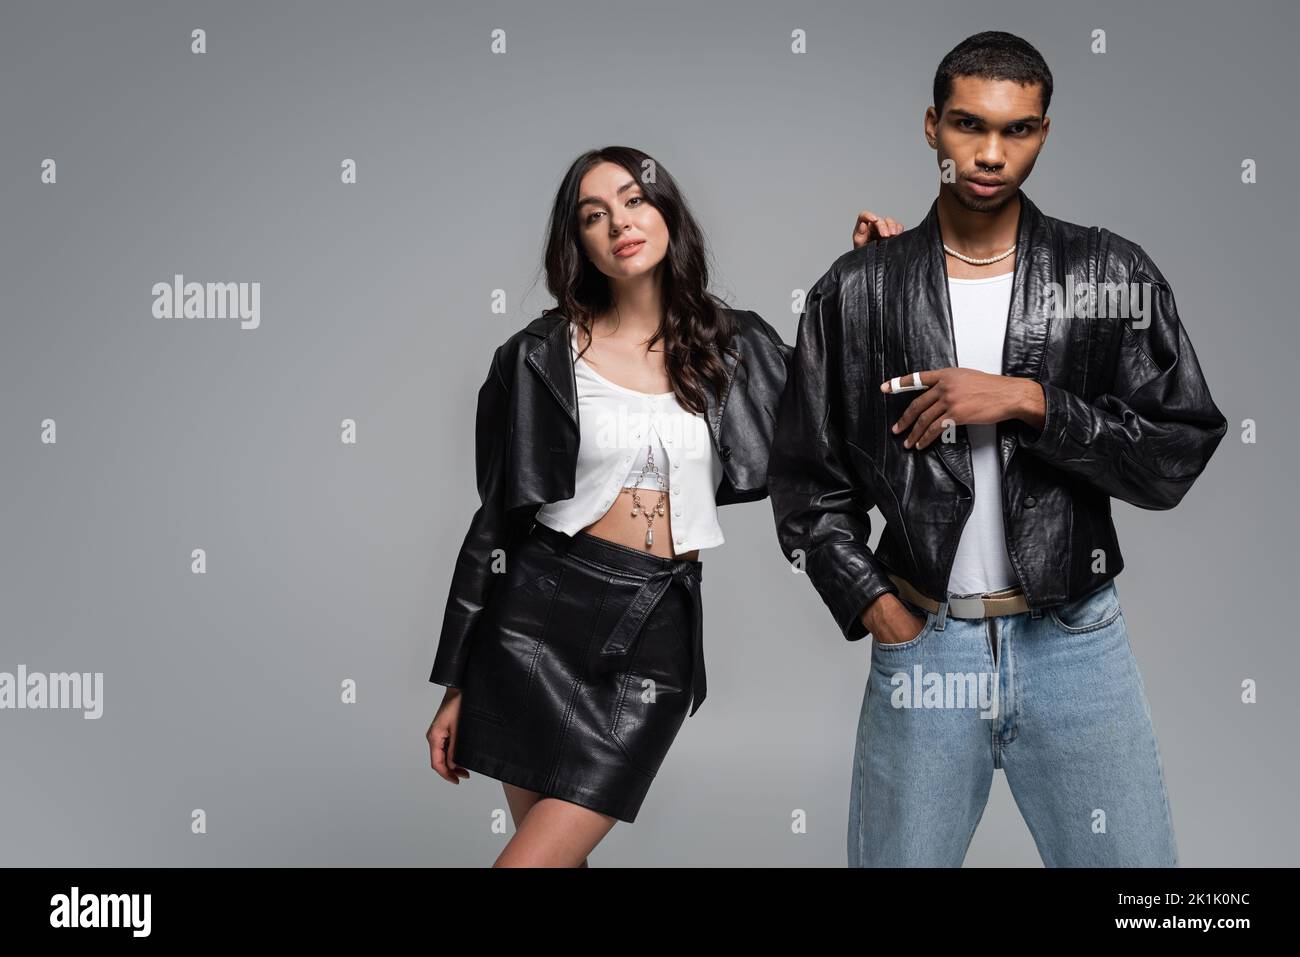 stylish african american man posing with hand in pocket near young woman in leather outfit isolated on grey,stock image Stock Photo